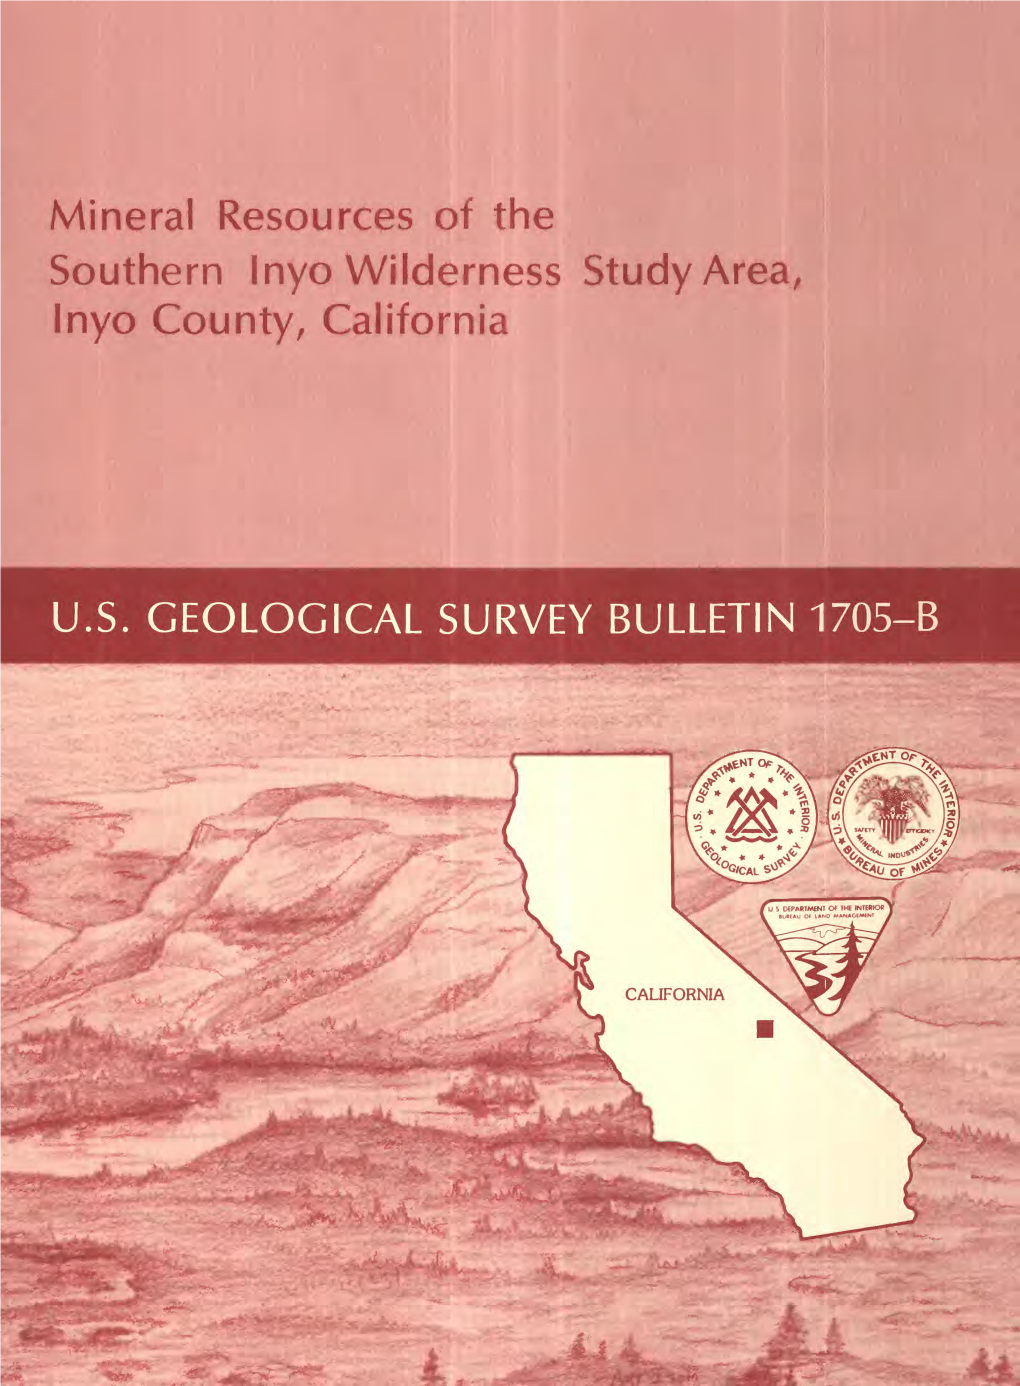 Mineral Resources of the Southern Inyo Wilderness Study Area, Inyo County, California